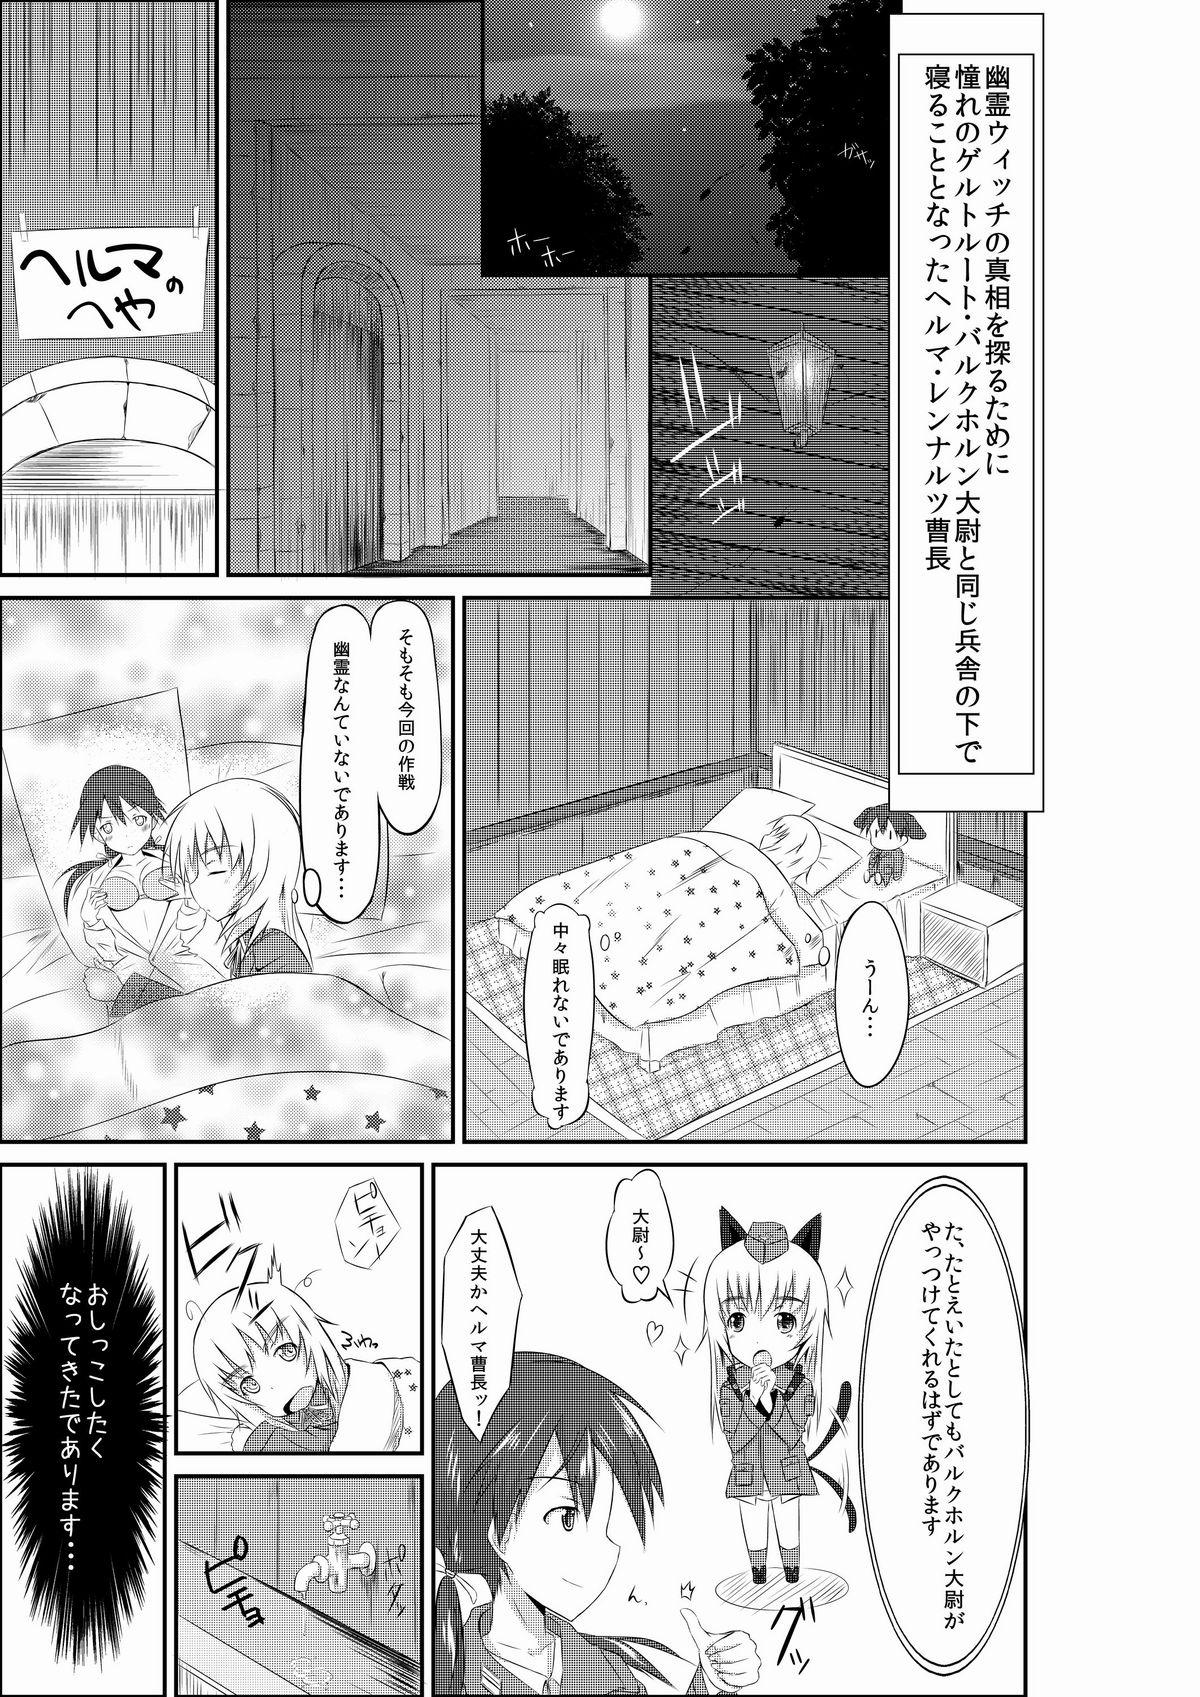 Beach 練習 お姉ちゃんとヘルマちゃん - Strike witches Amateur Cumshots - Page 1